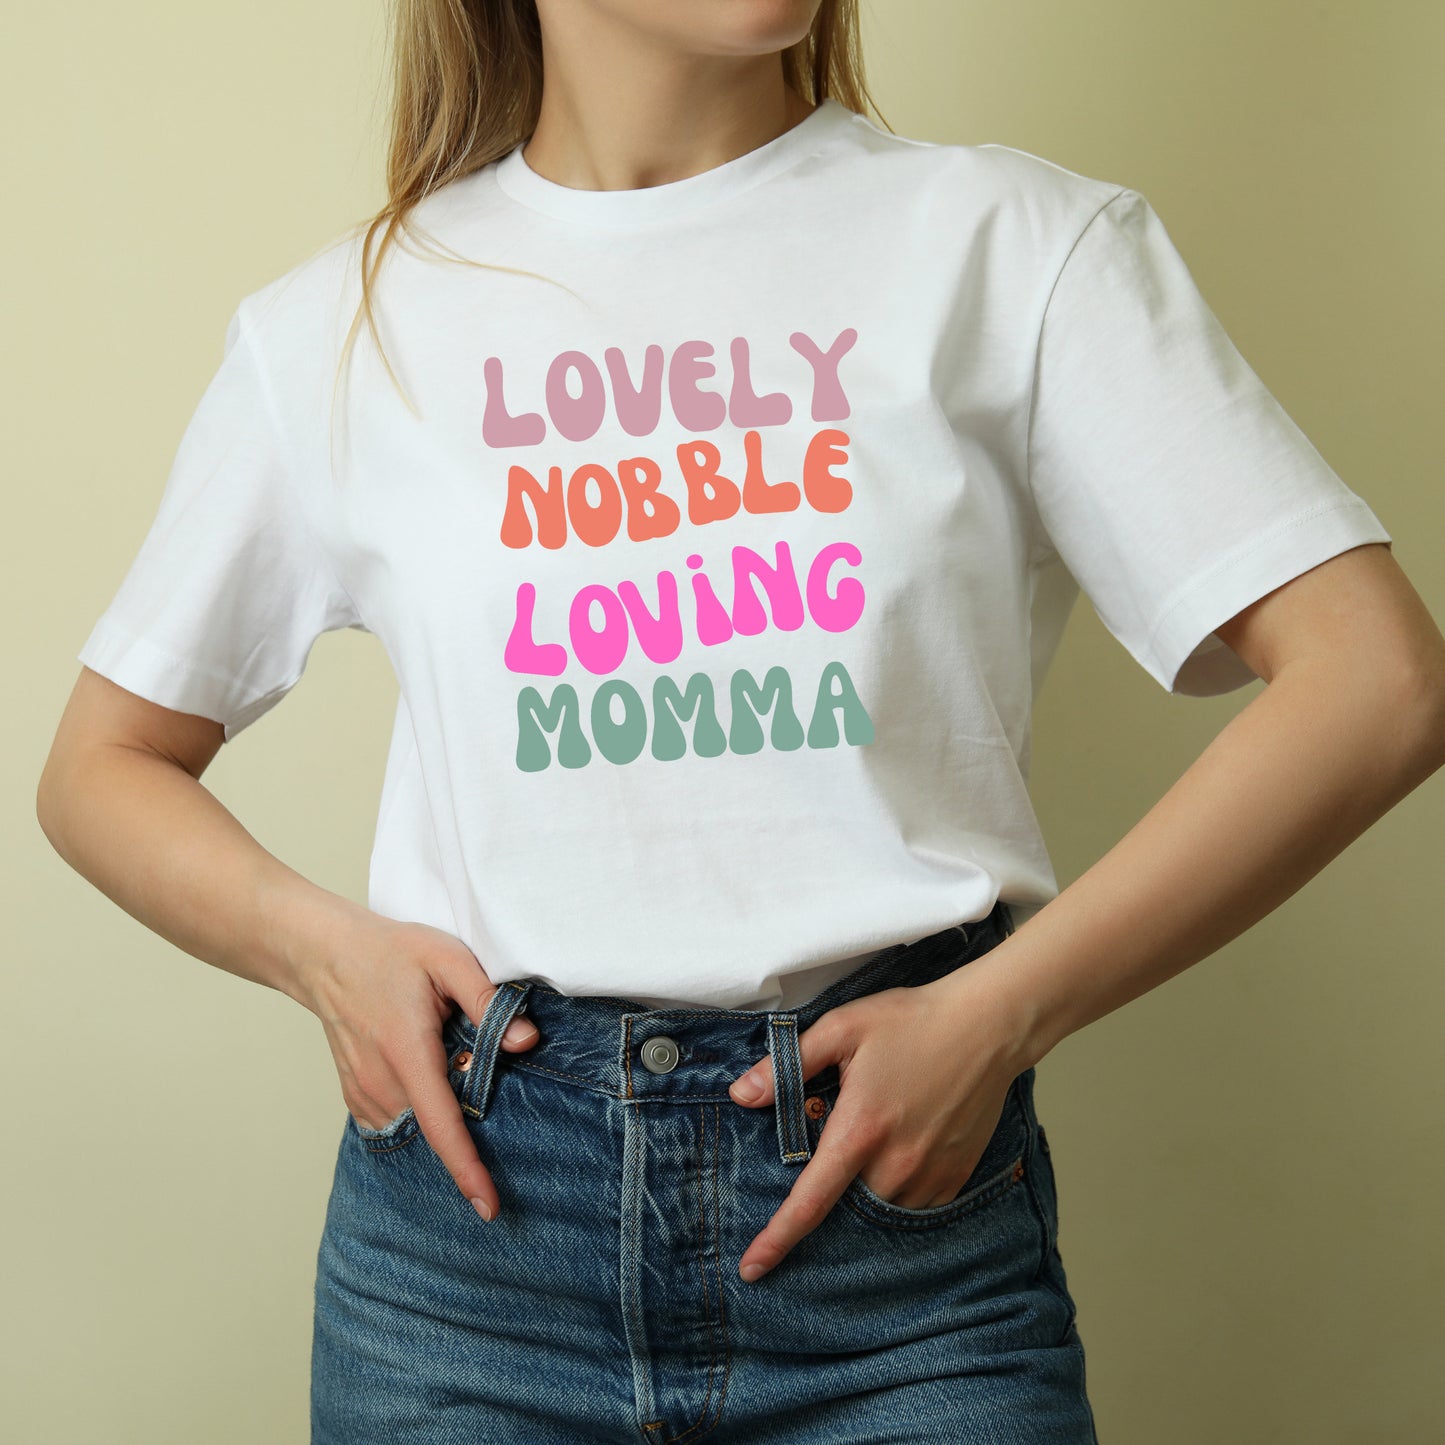 My first mothers day mom shirt, lovely nobble loving momma